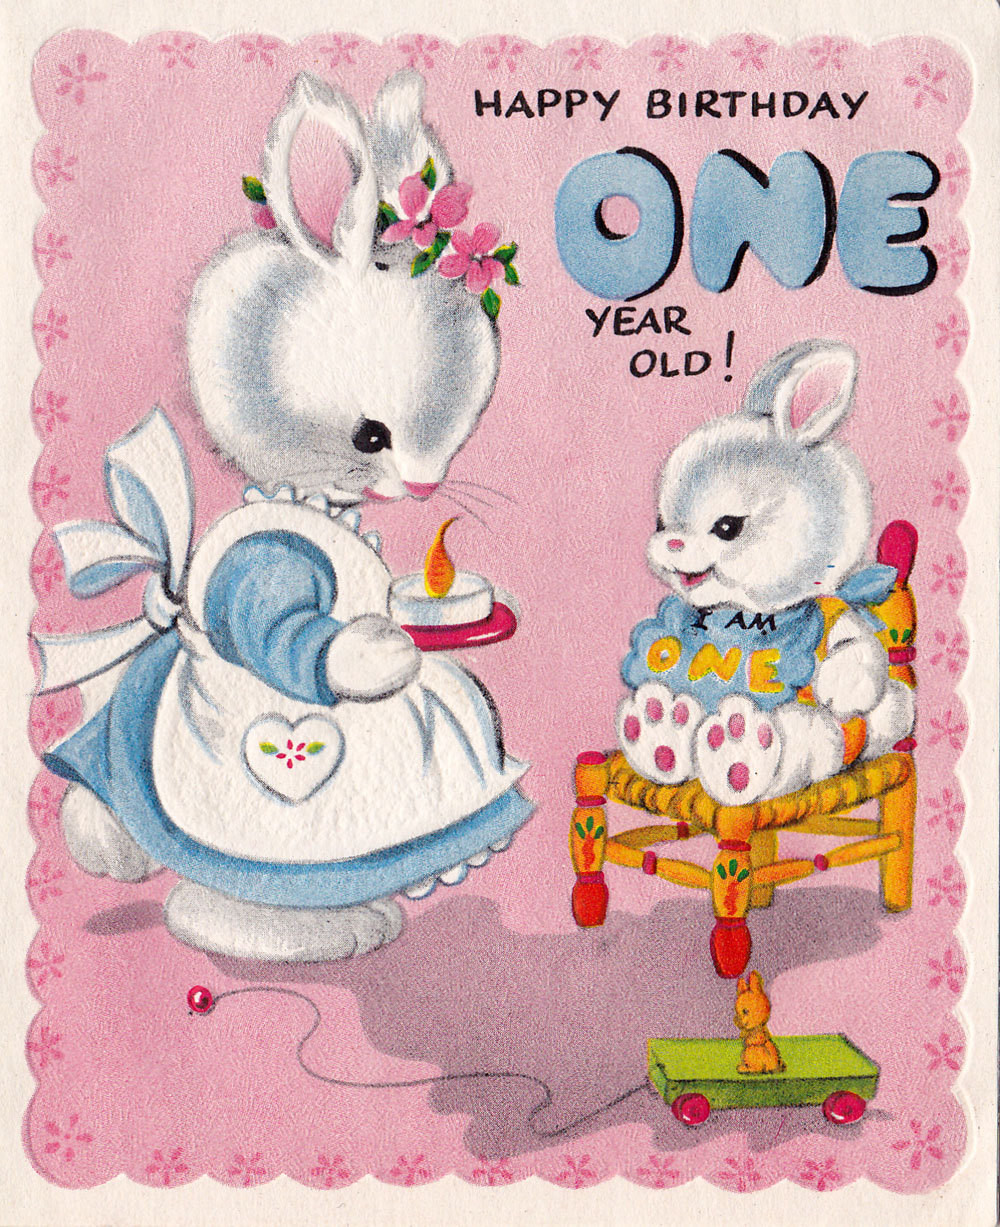 One Year Old Birthday Wishes
 Vintage 1950s Happy Birthday 1 Year Old Greeting Card 01